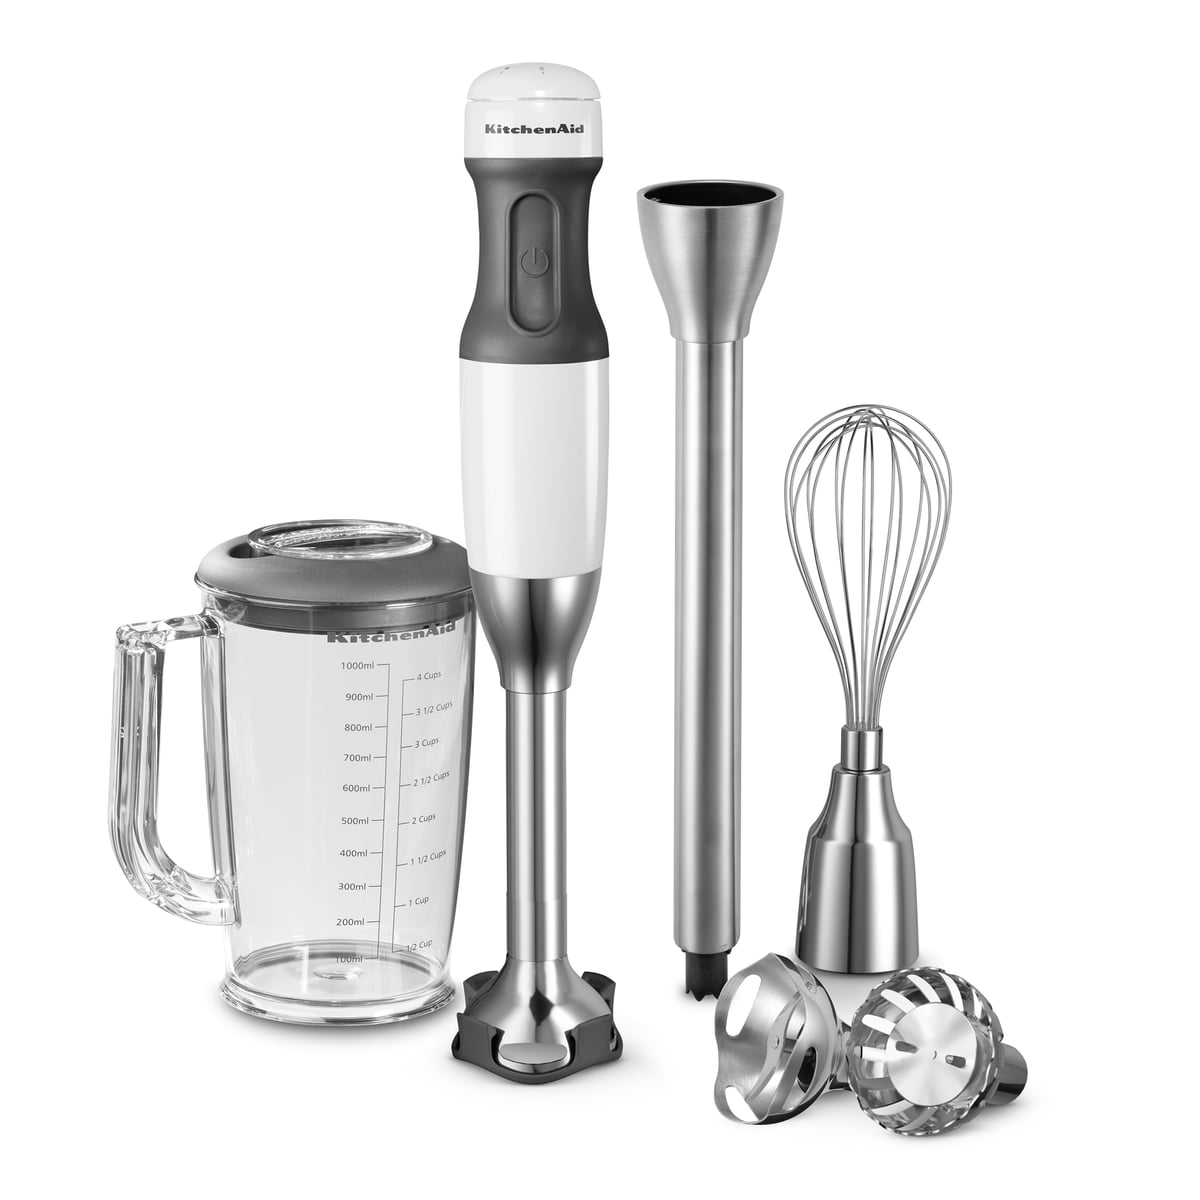 The Classic Hand Blender by KitchenAid